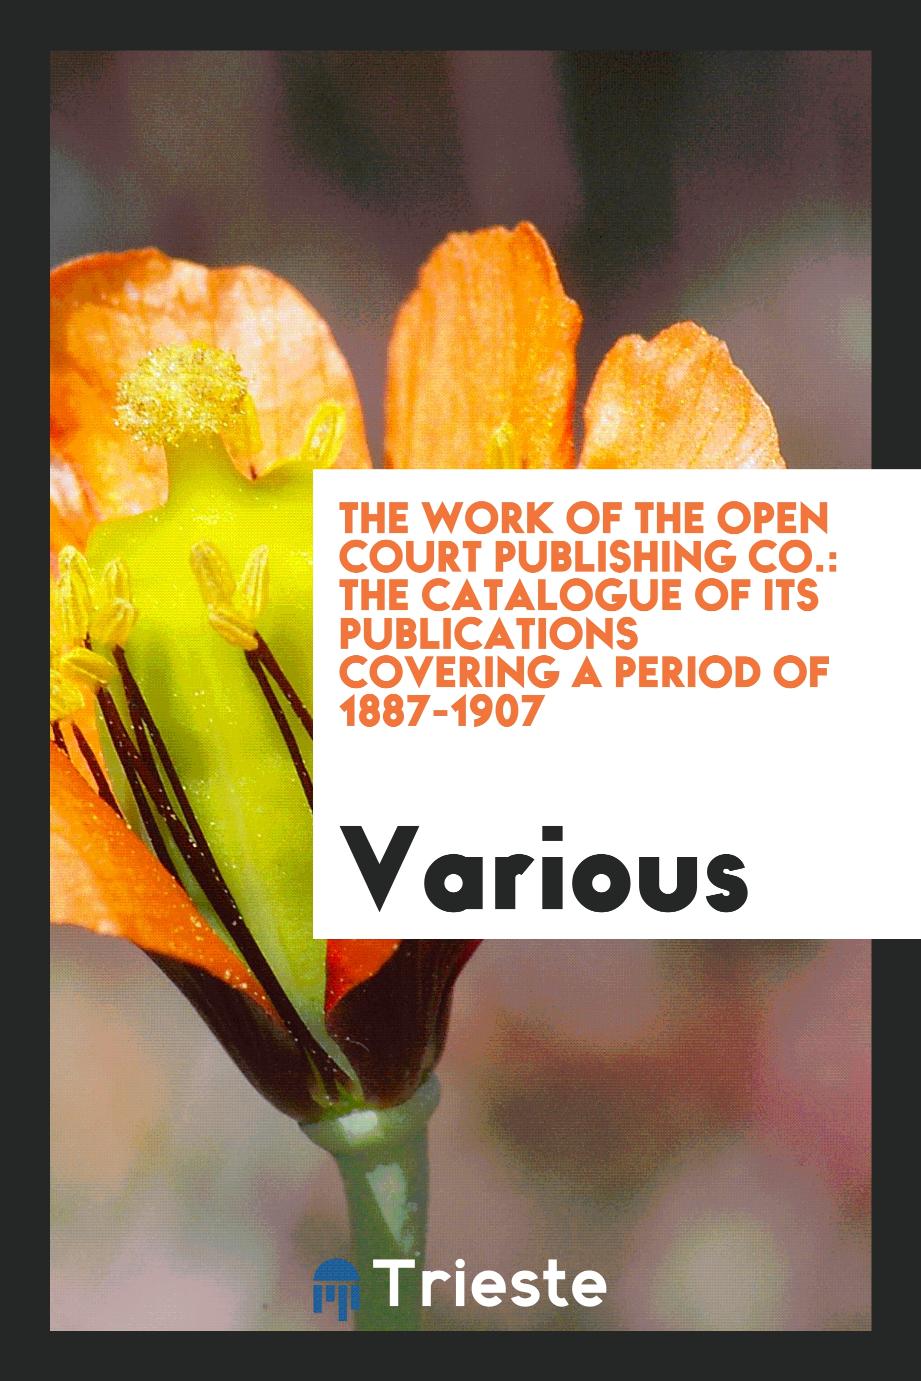 The work of the Open court publishing co.: the catalogue of its publications covering a period of 1887-1907